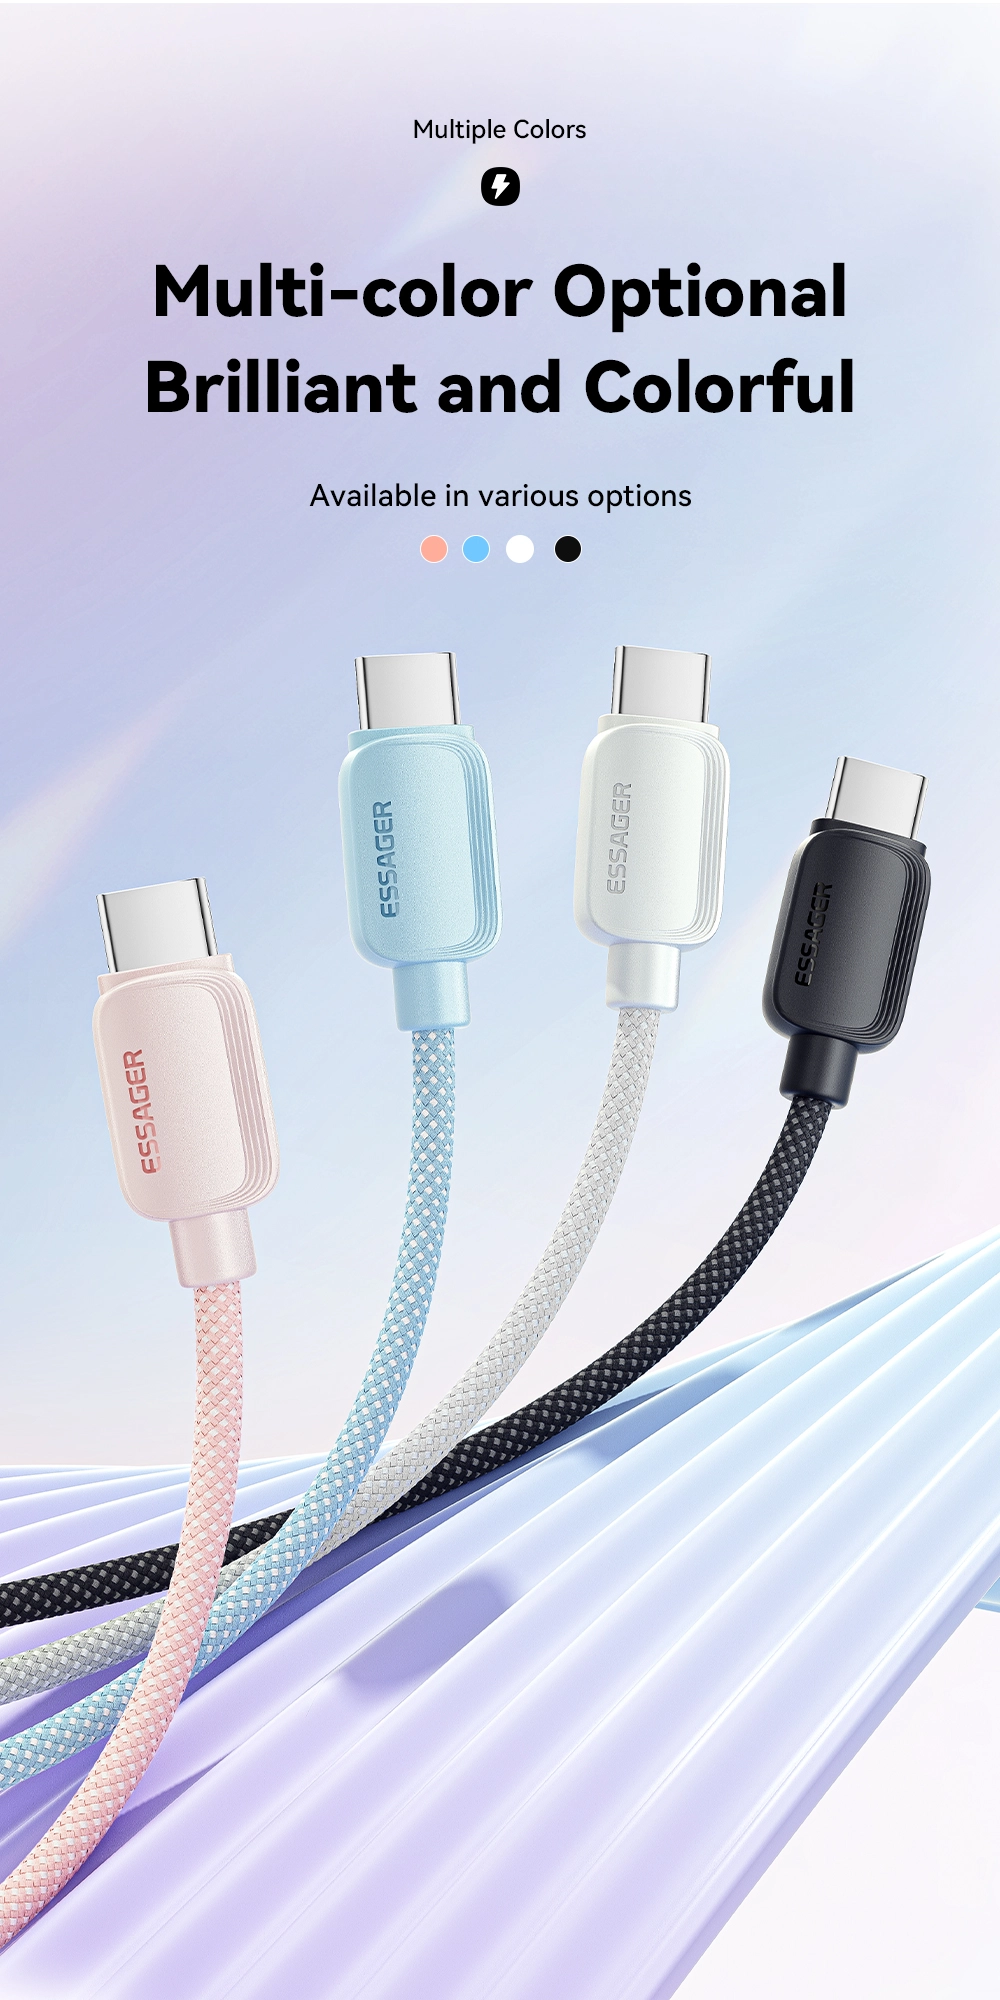 USB C Cable,USB to USB C,USB A to USB C Cable